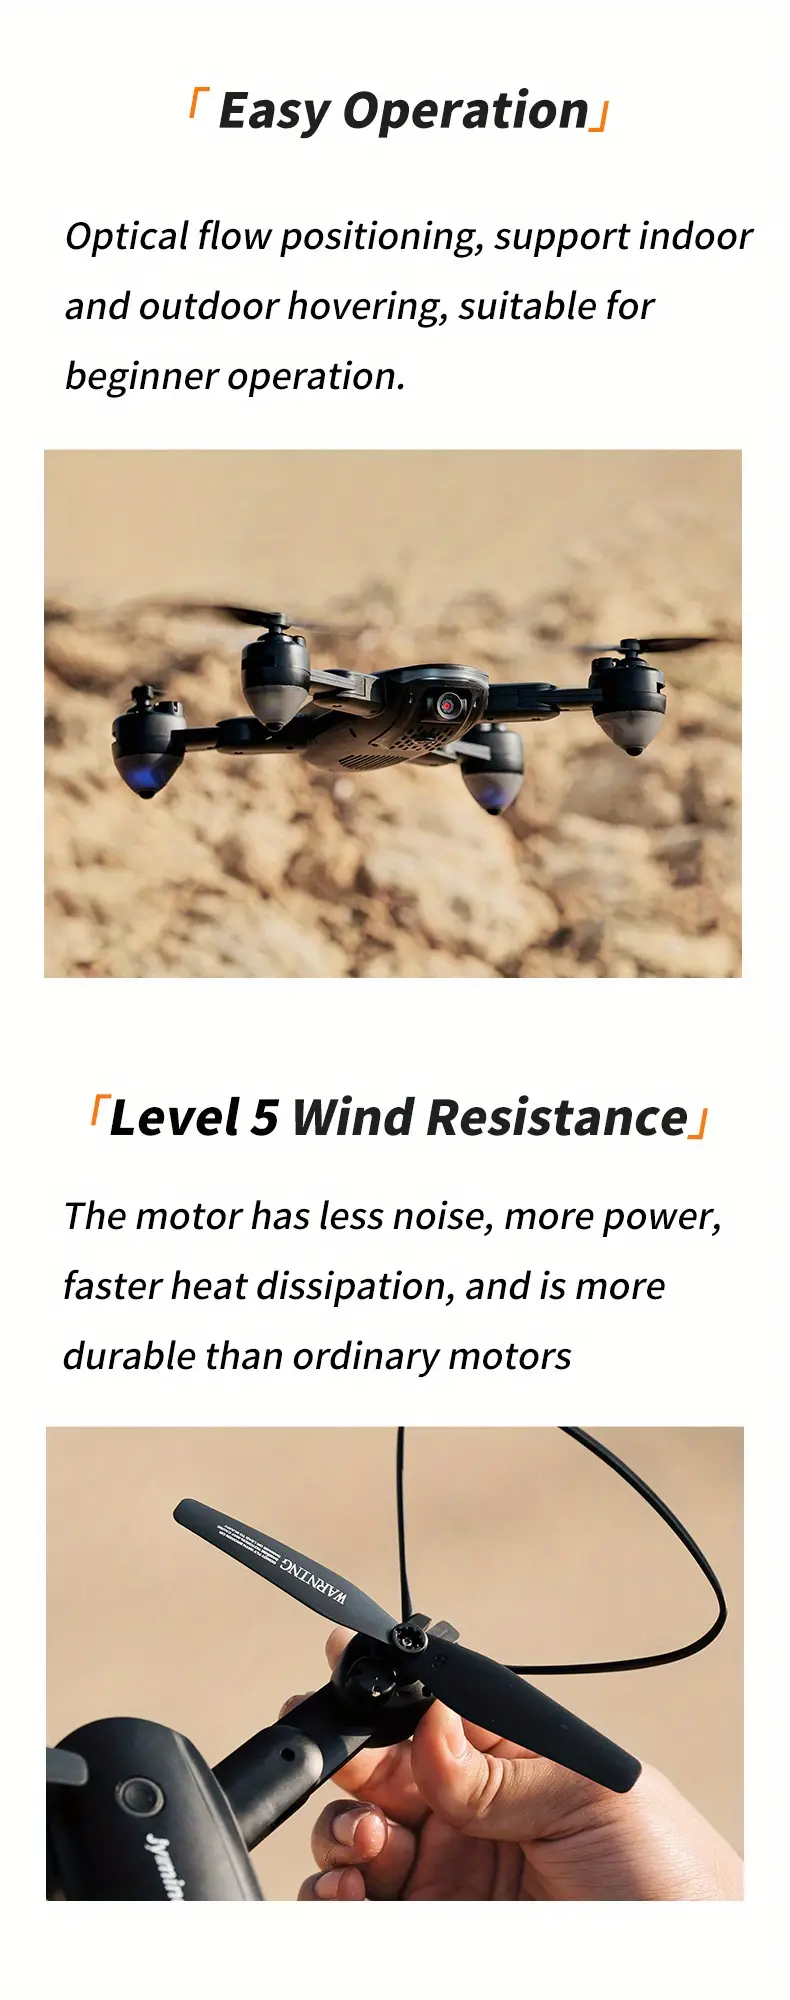 4k professional hd camera gps return aerial photography foldable quadcopter headless mode visual positioning auto return mobile app control details 8